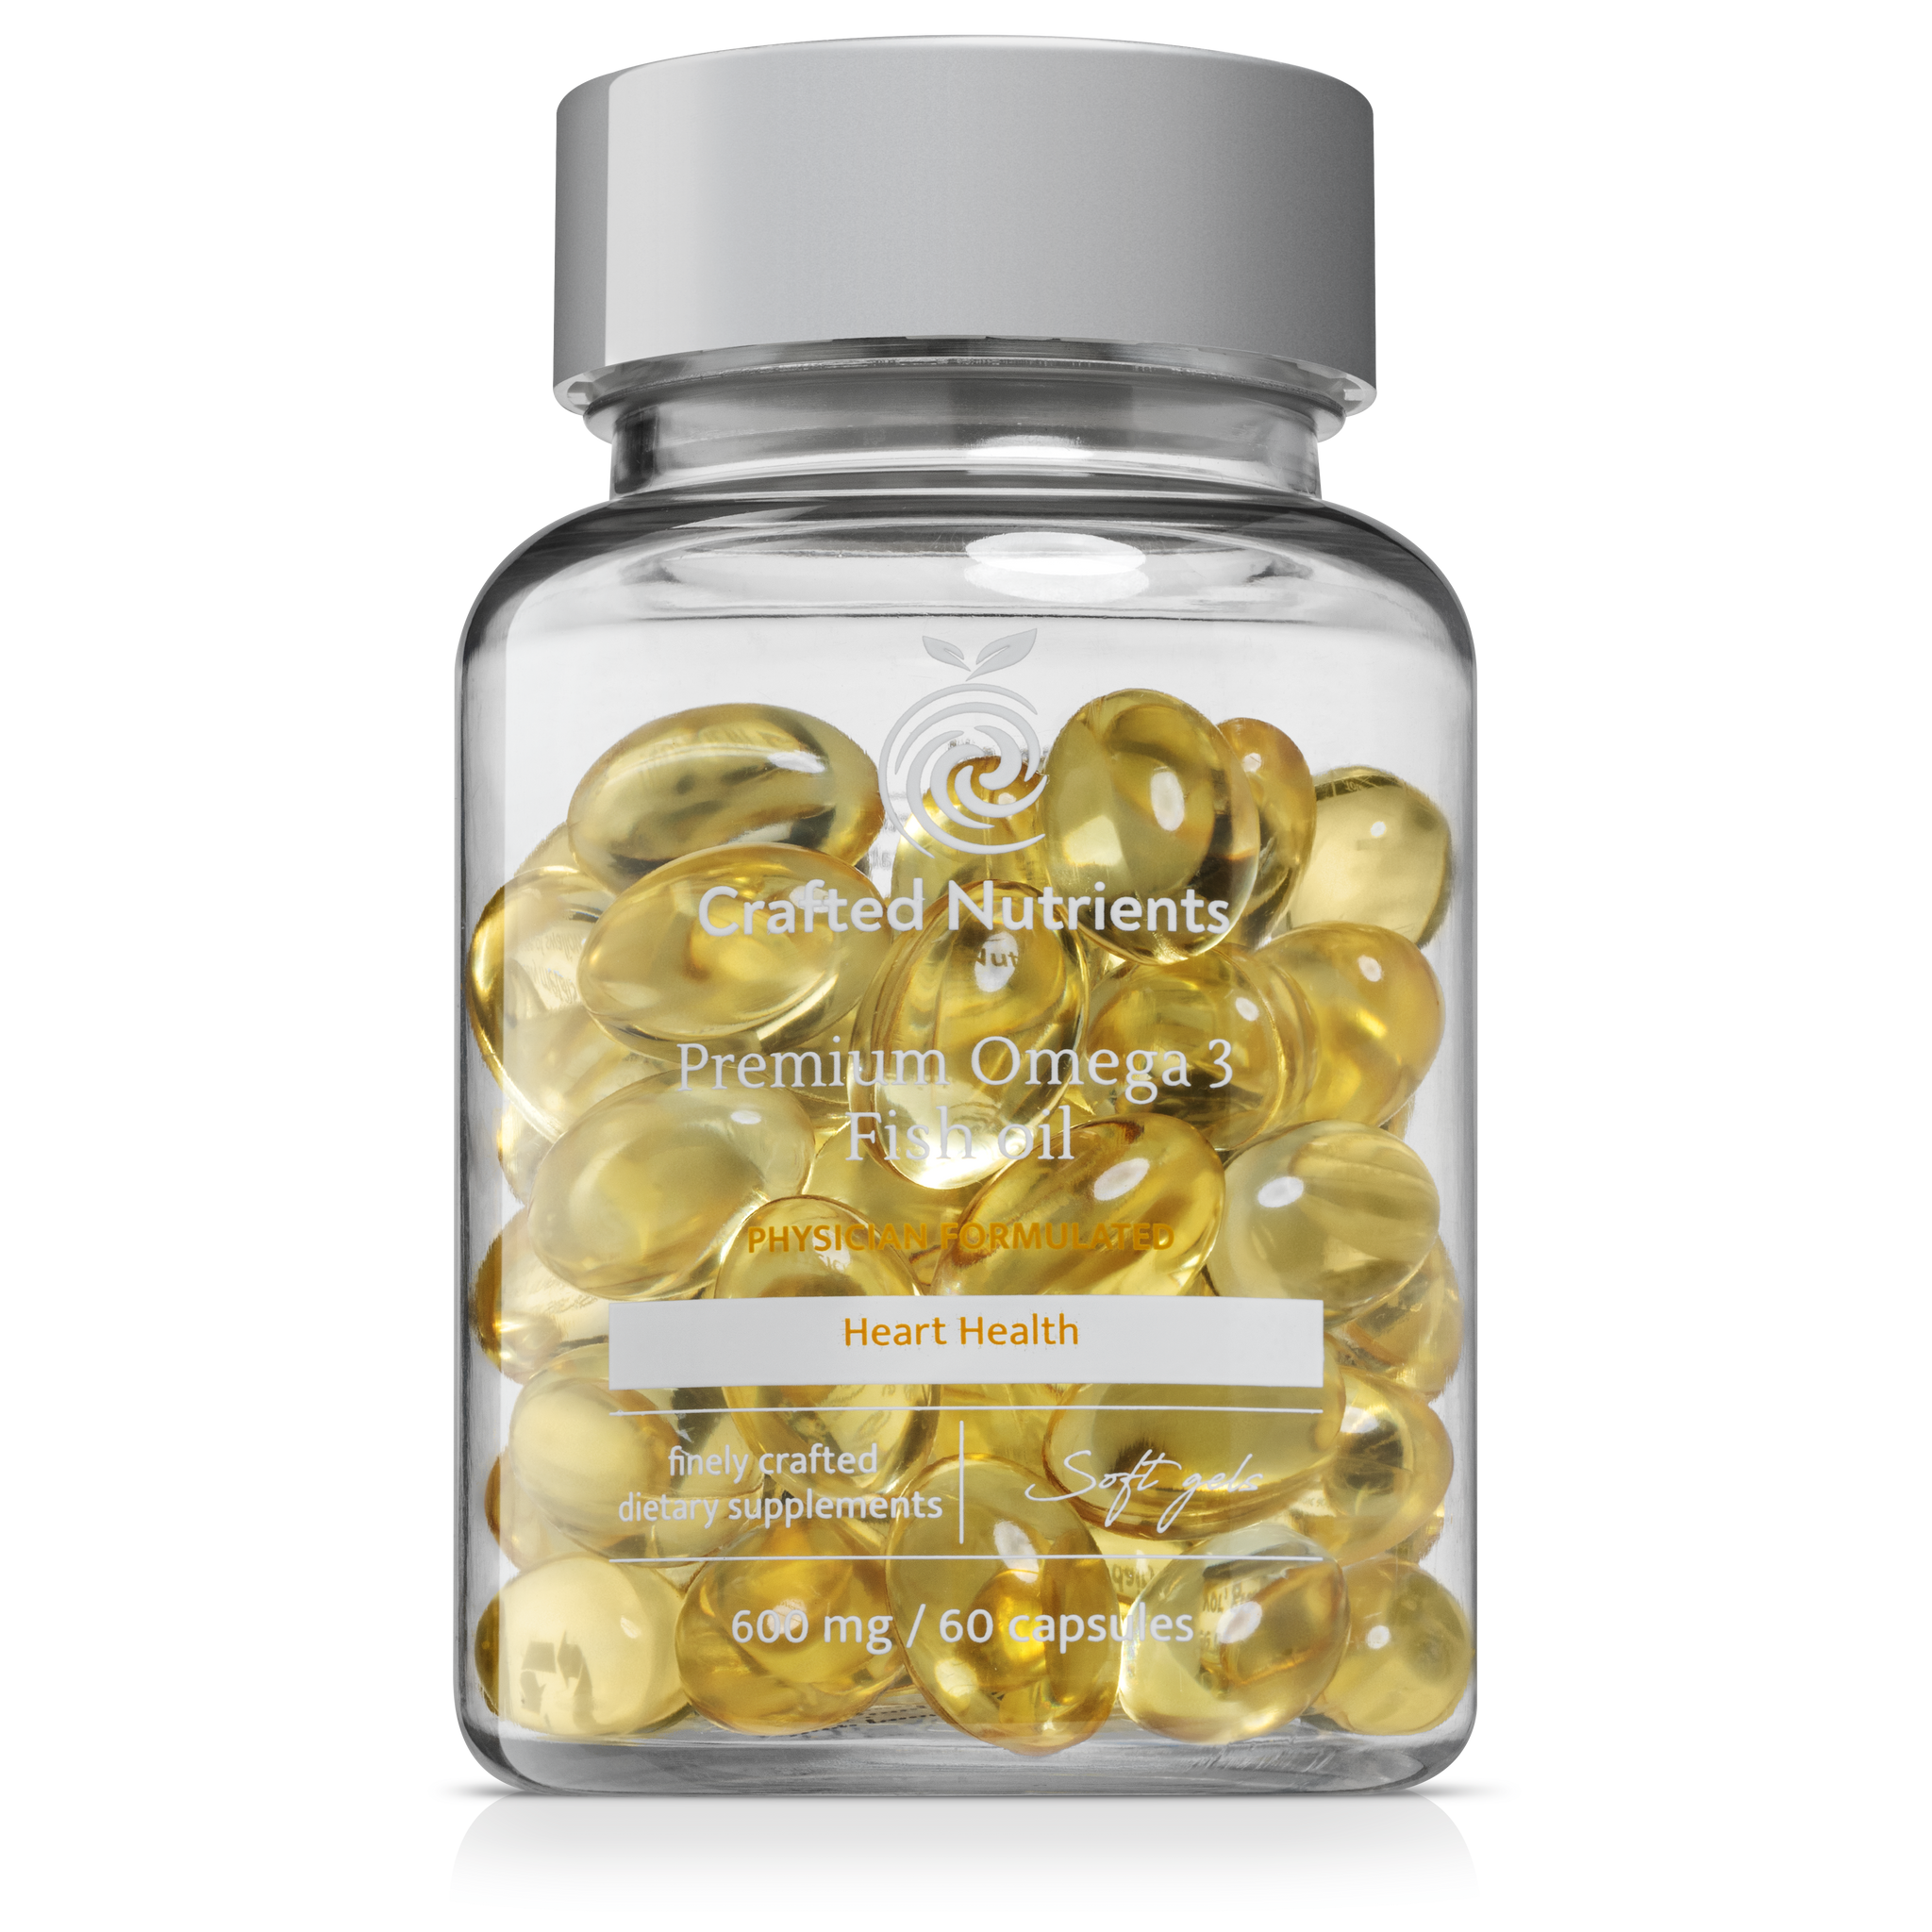 Crafted Nutrients Premium Omega 3 Fish Oil